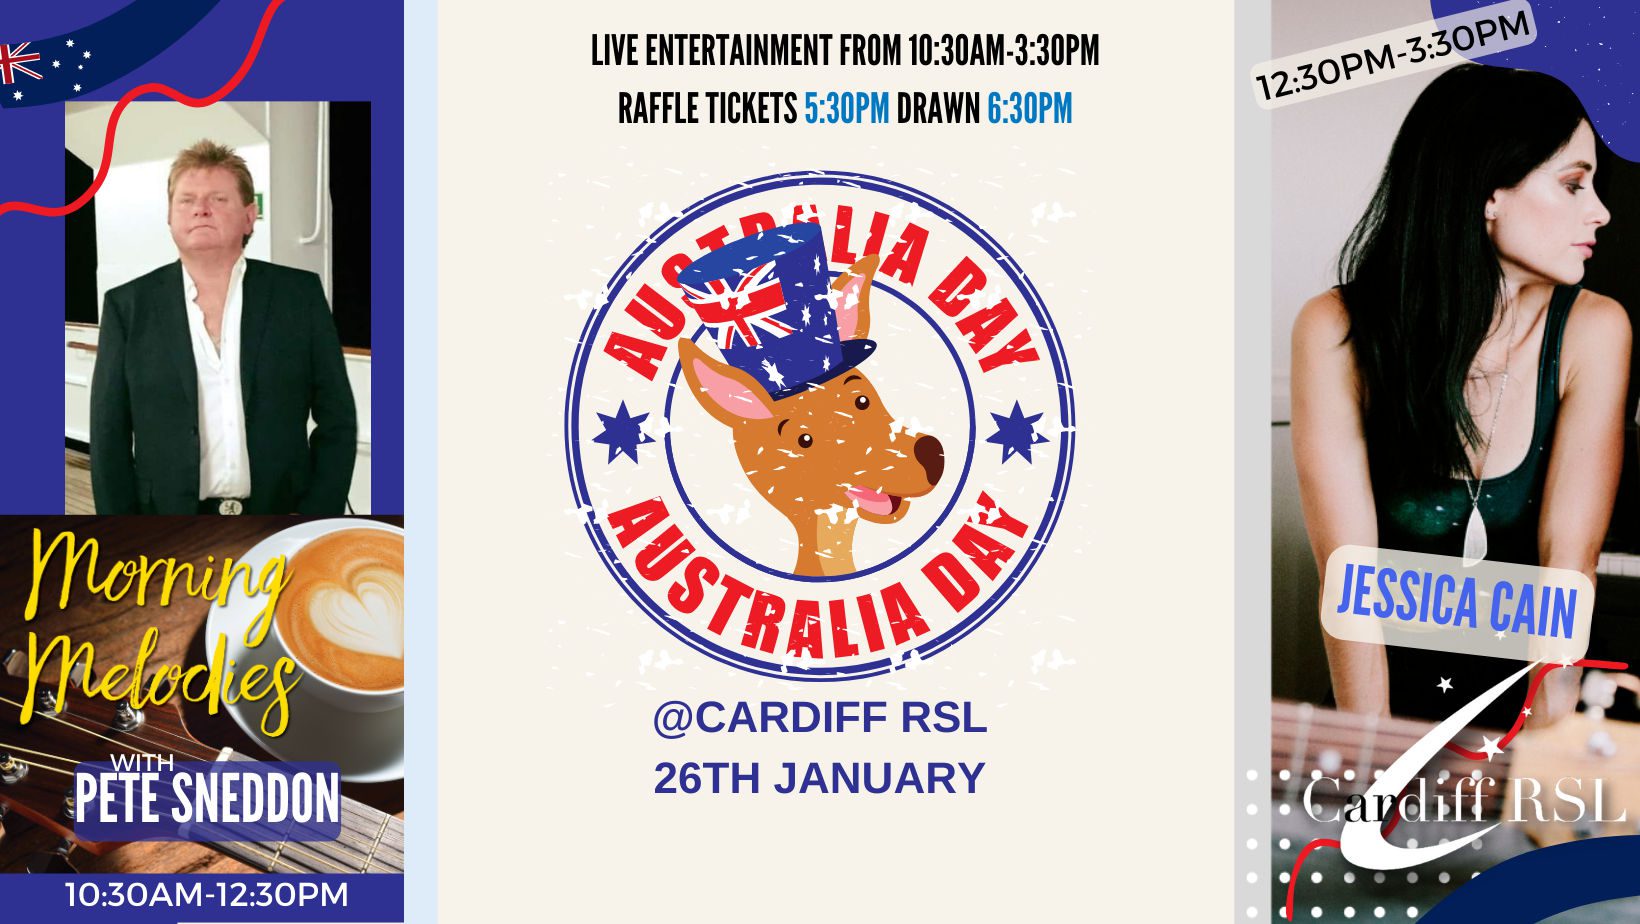 Event Poster for Australia Day @ Cardiff RSL | EventsontheHorizon.com